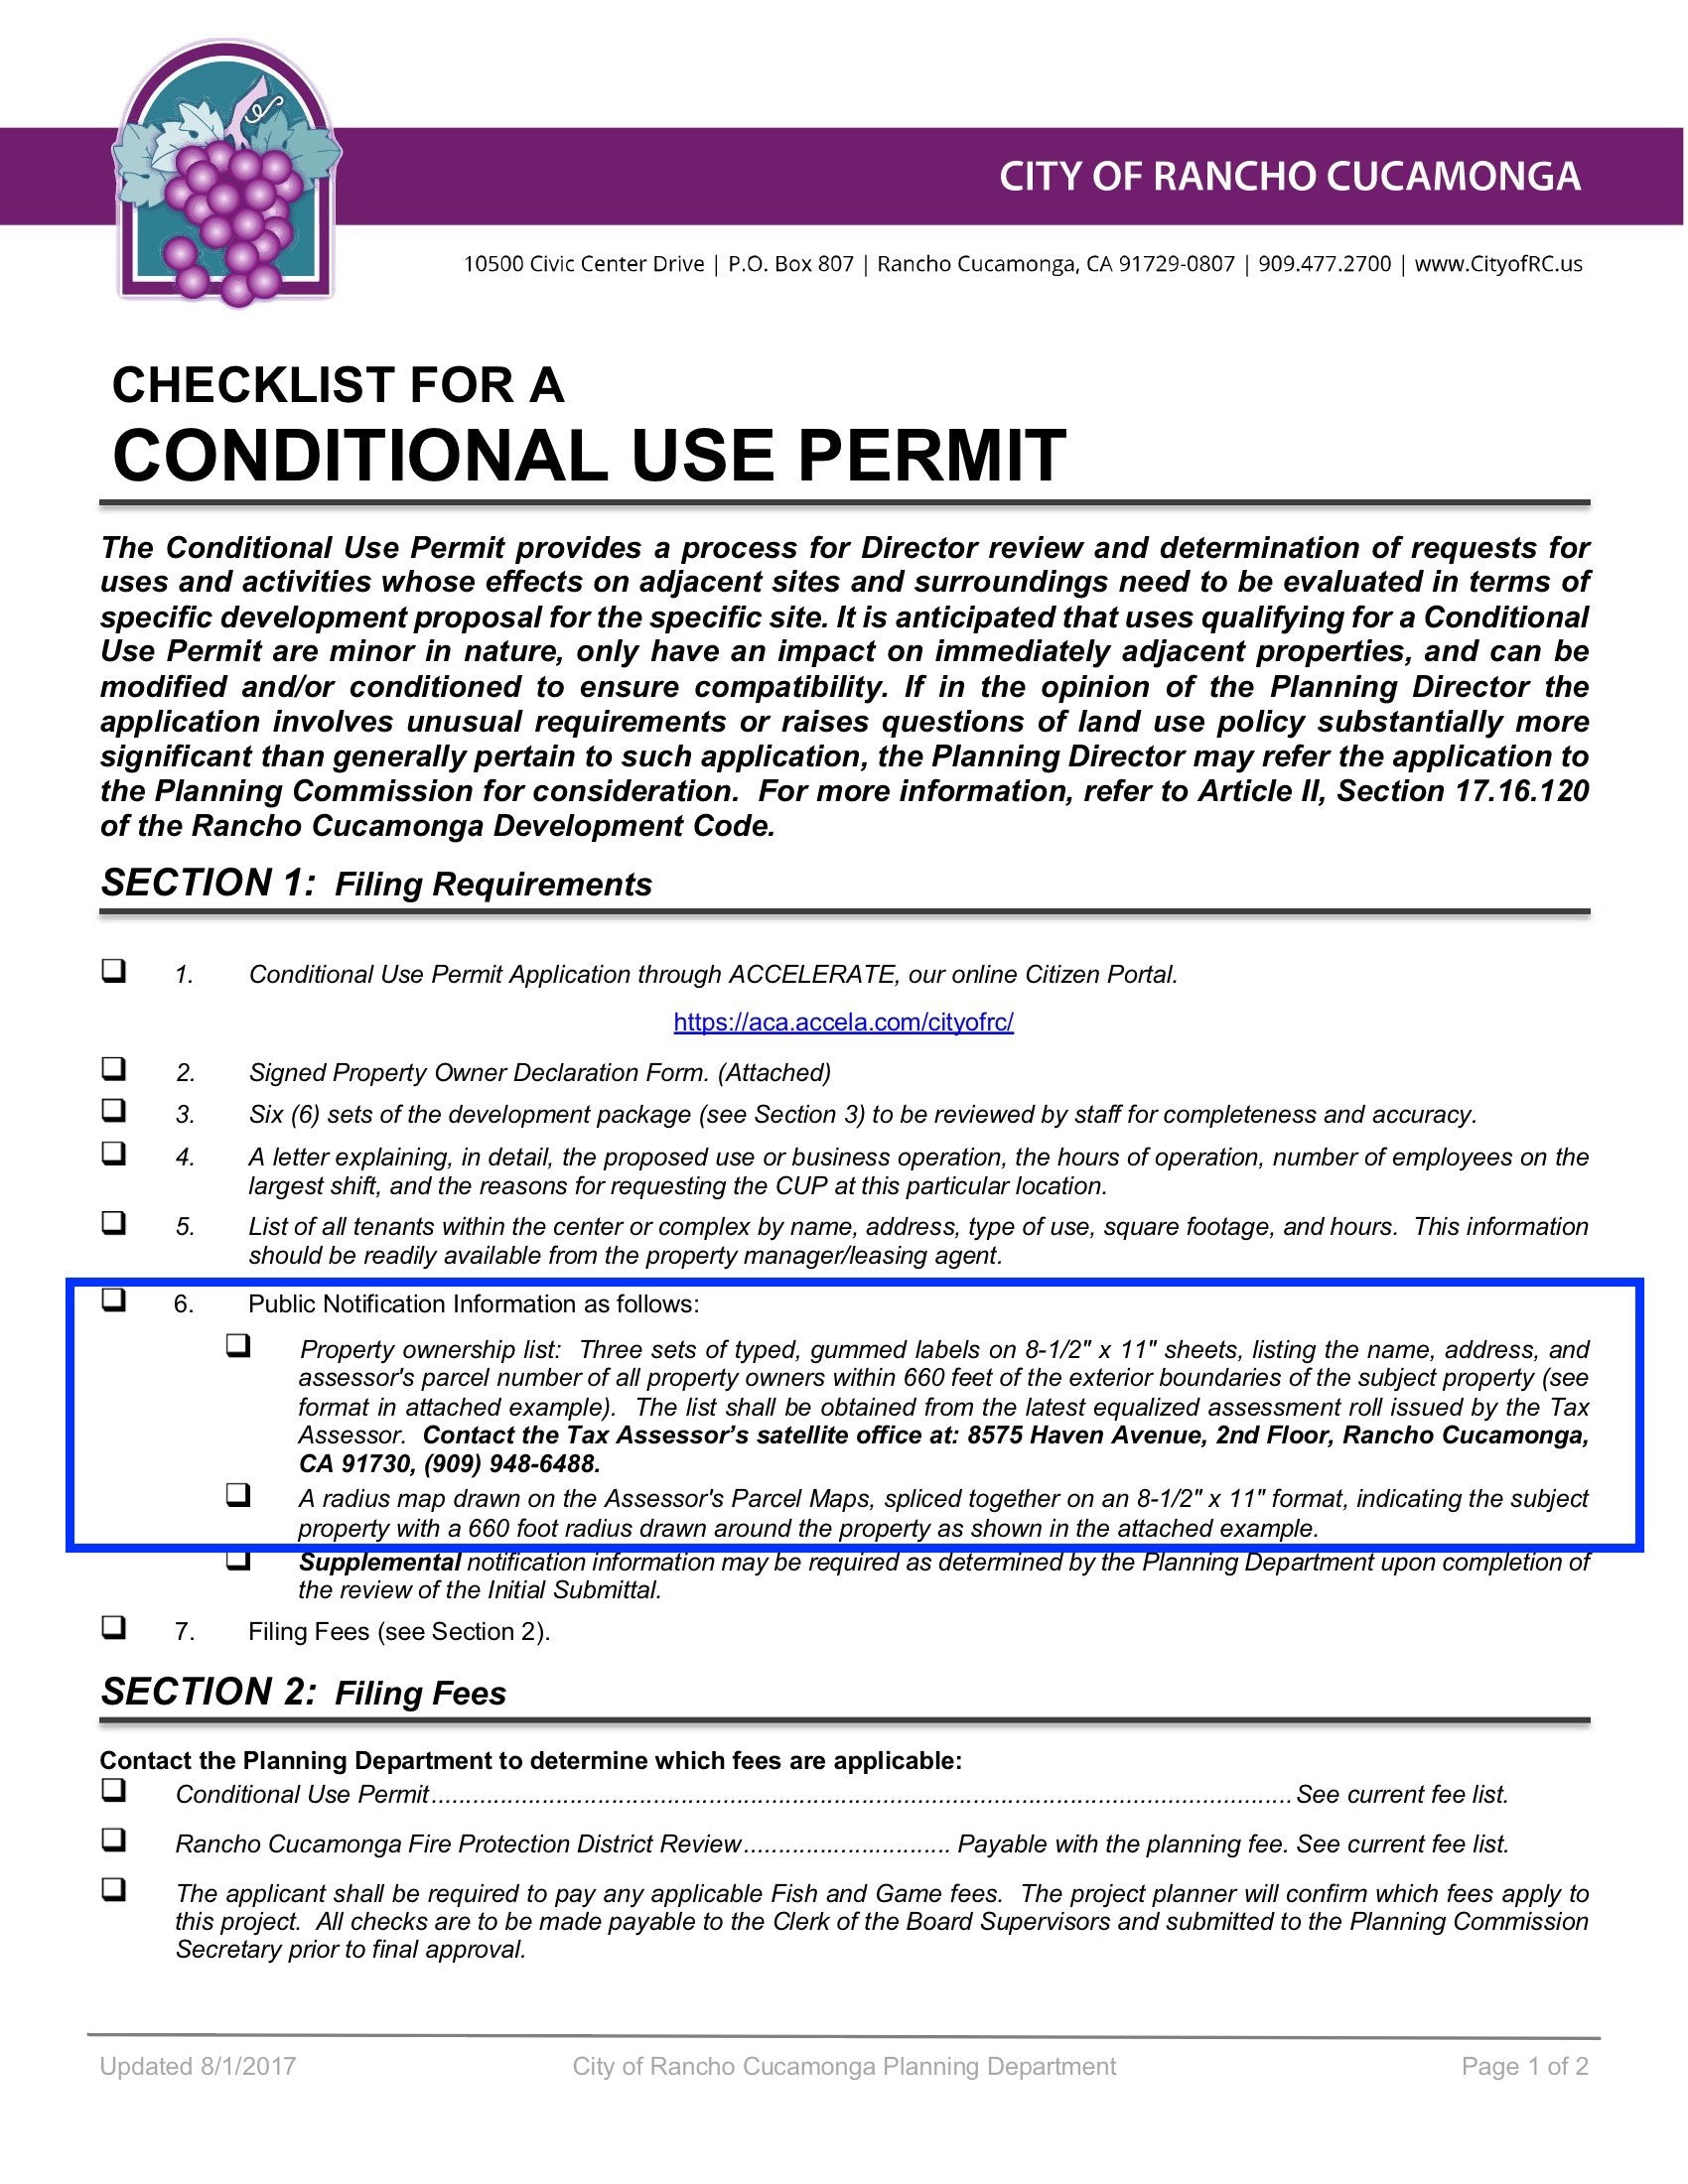 City of Rancho Cucamonga Checklist Conditional Use Permit Public Notification Information